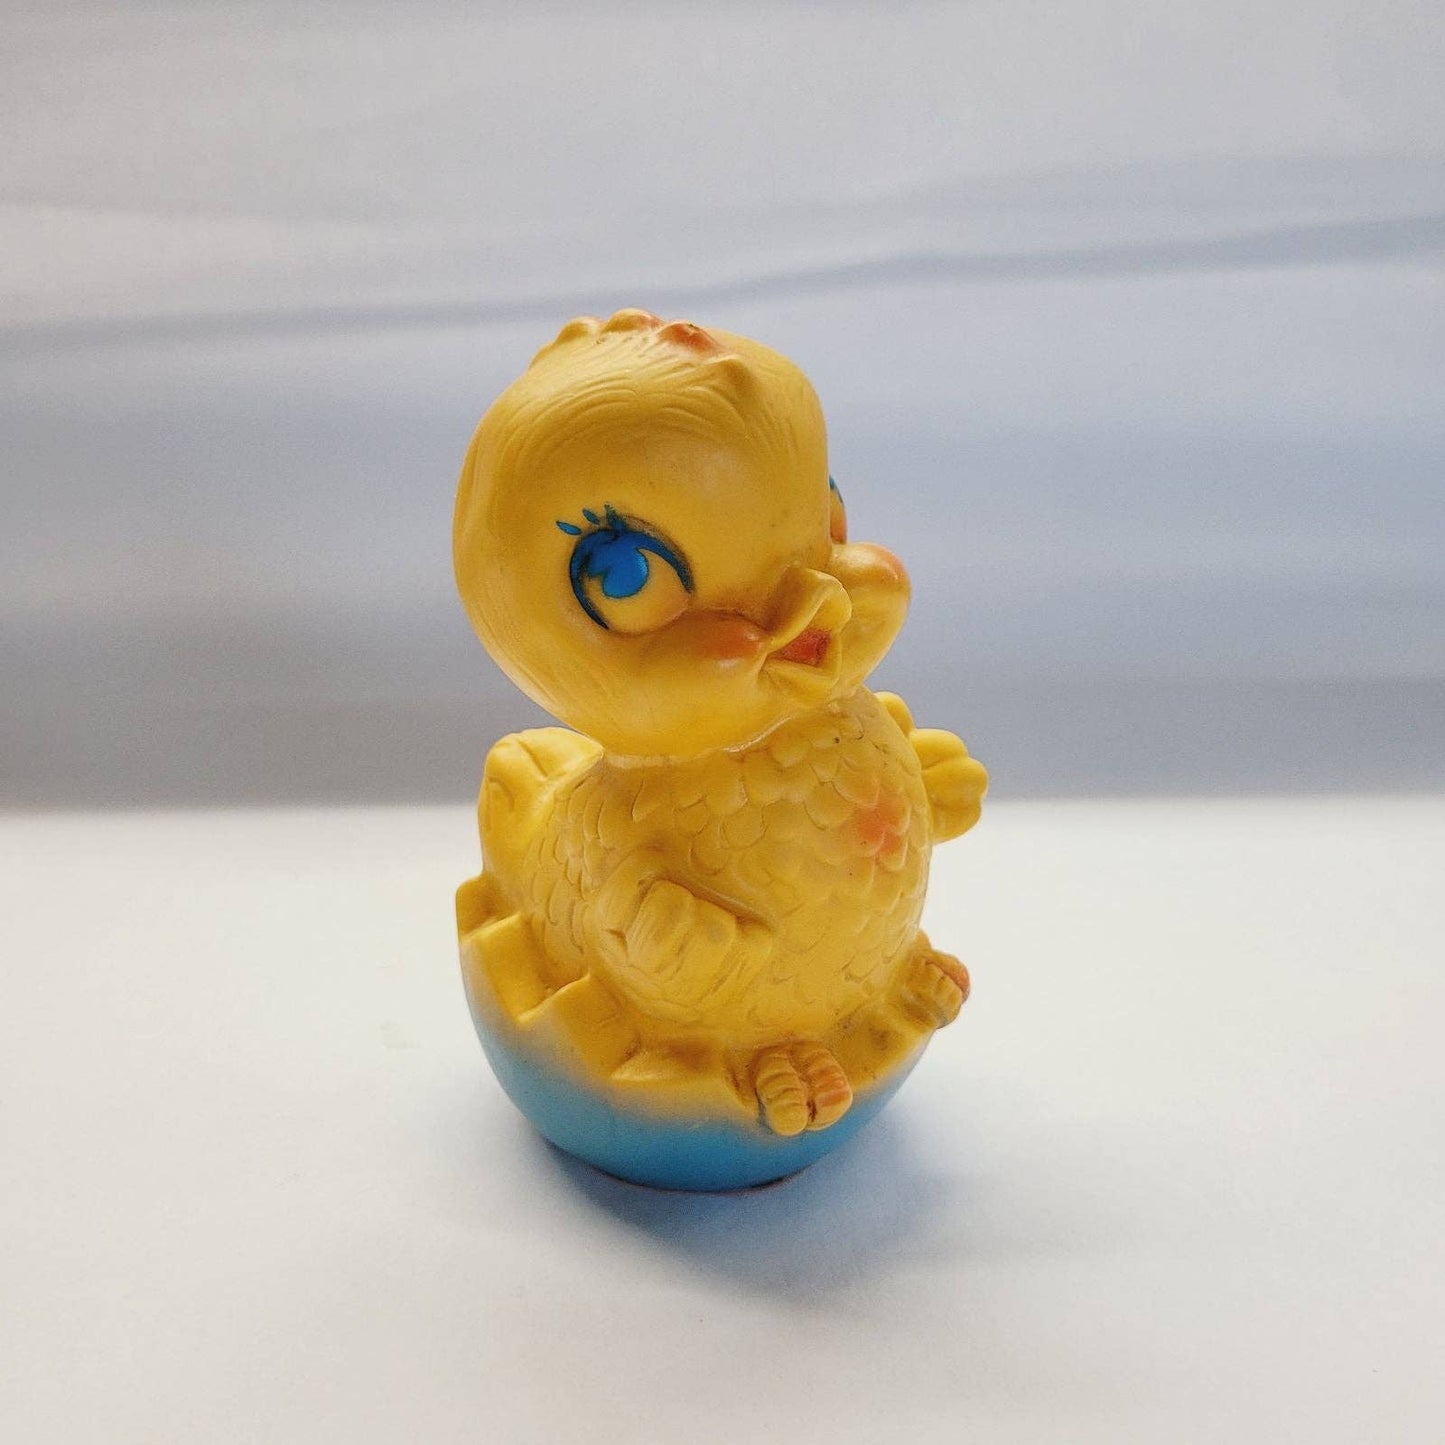 Vintage Dreamland Chick Squeaky Toy